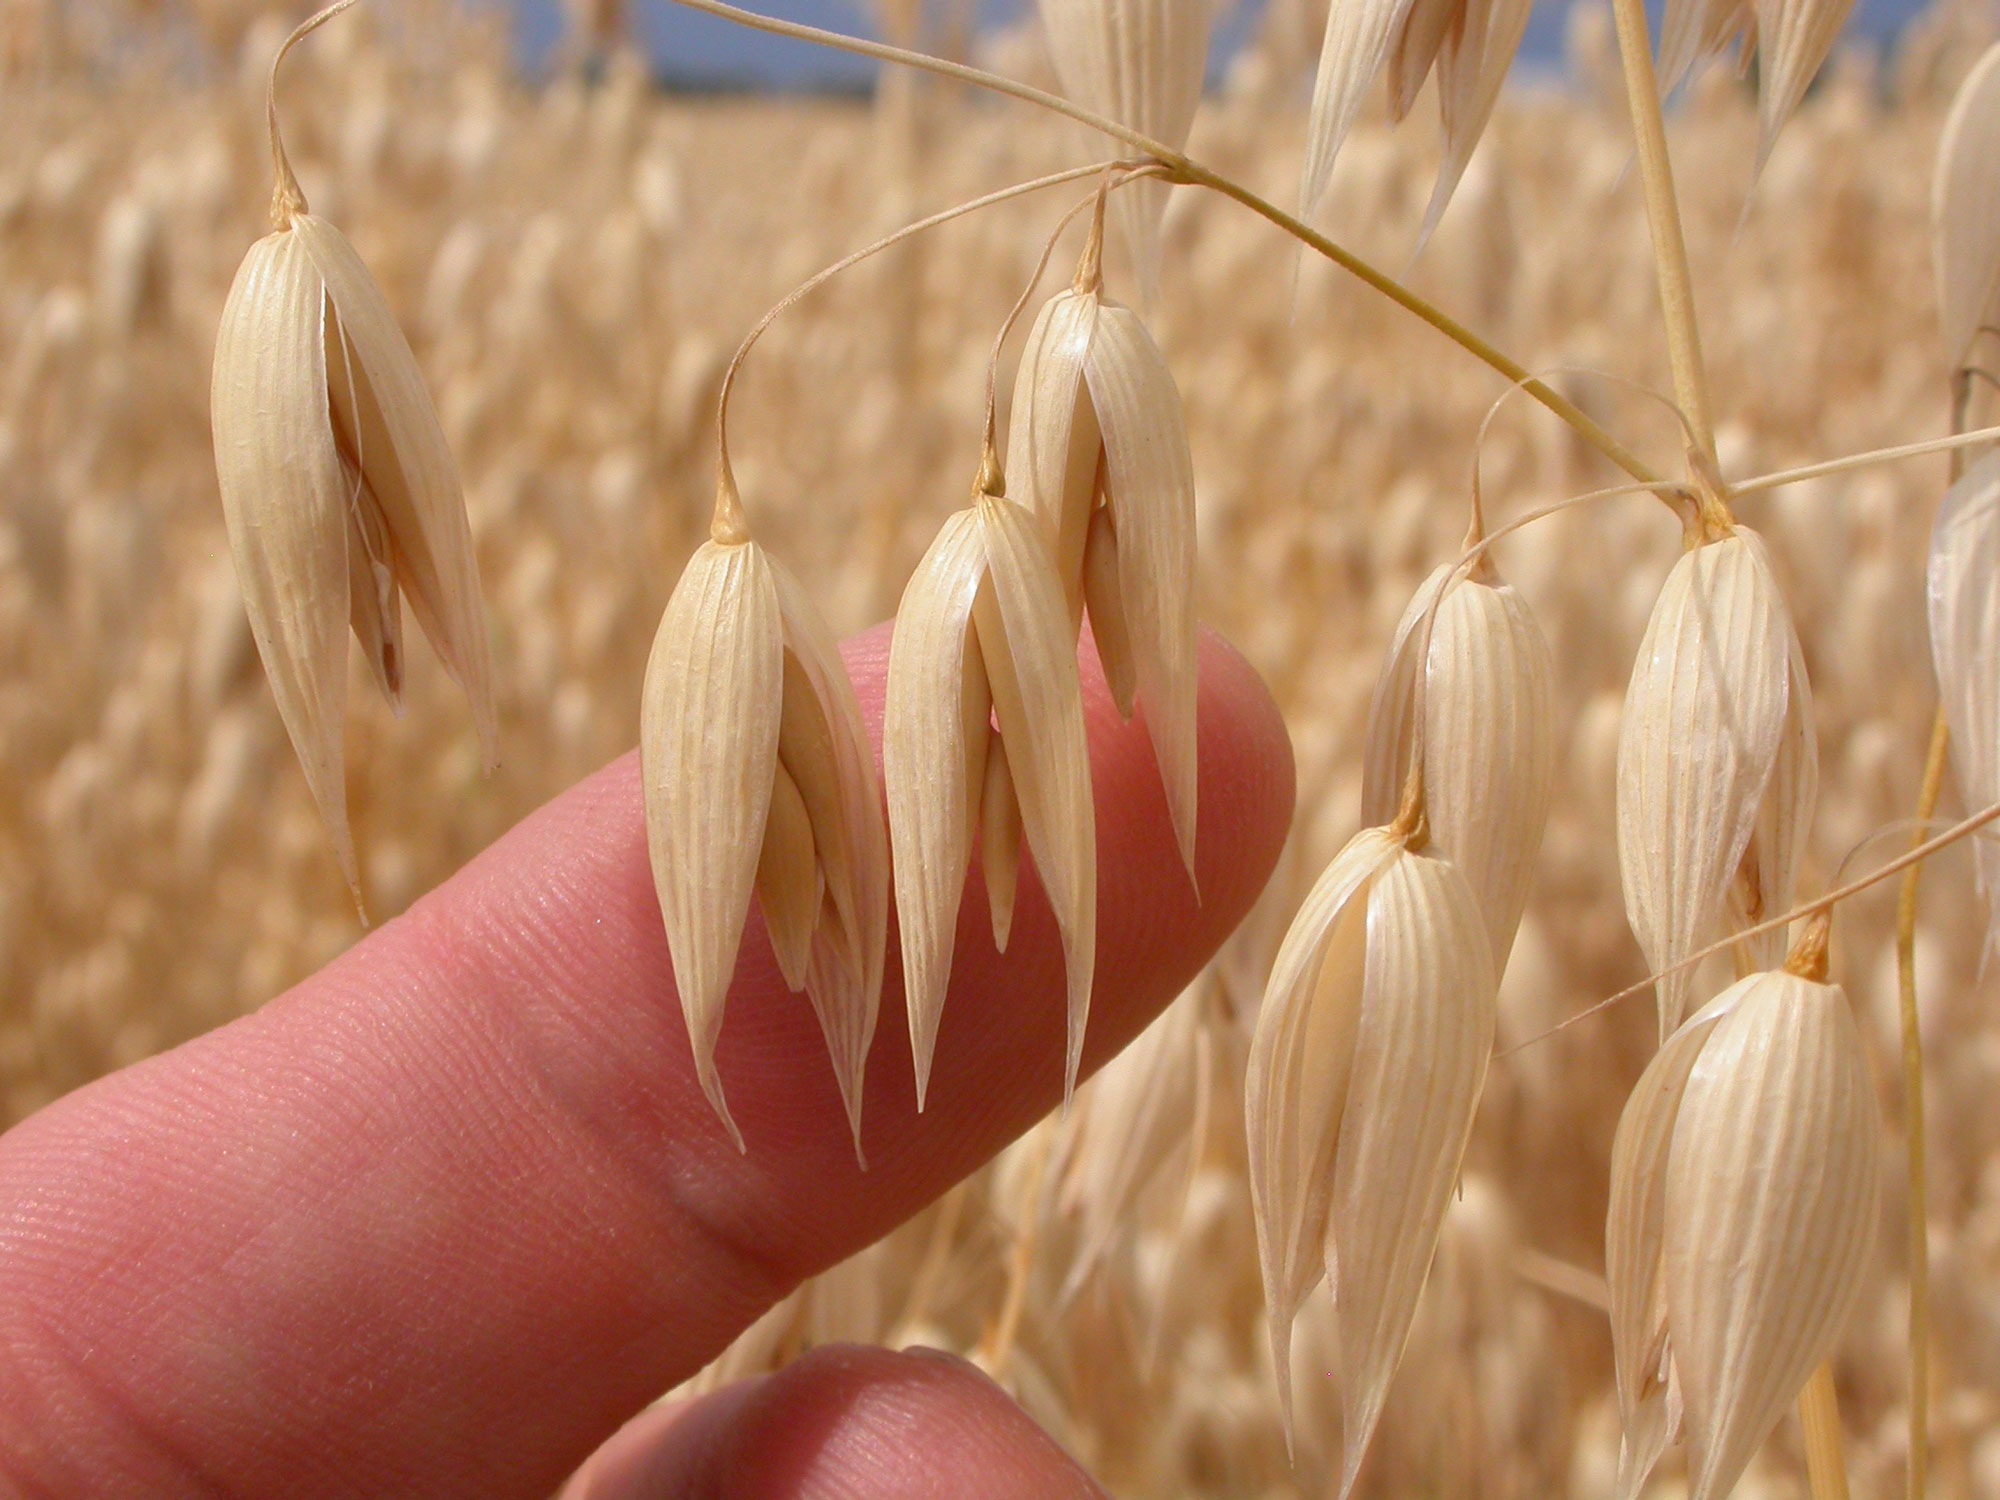 Photograph of cultivated oats in Montana, U.S.A. The photo shows beige oat spikelets handing down from an inflorescence. A person's finger is behind three of the spikelets.